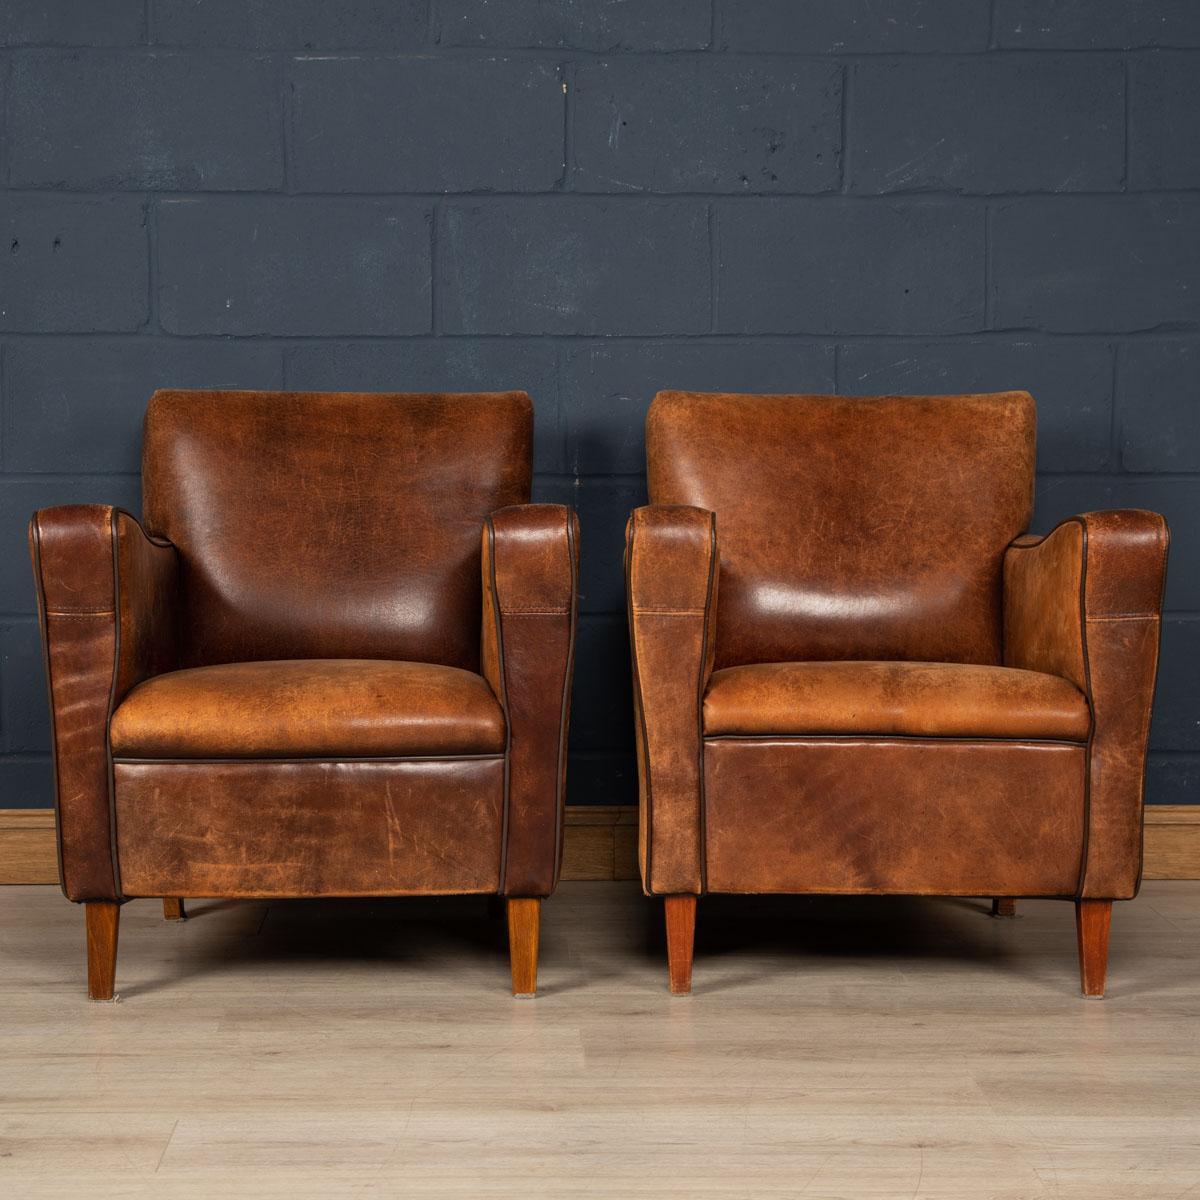 Showing superb patina and colour, this wonderful pair of club chairs were hand upholstered sheepskin leather in Holland by the finest craftsmen in the latter part of the 20th century.

CONDITION
In good condition - some wear consistent with